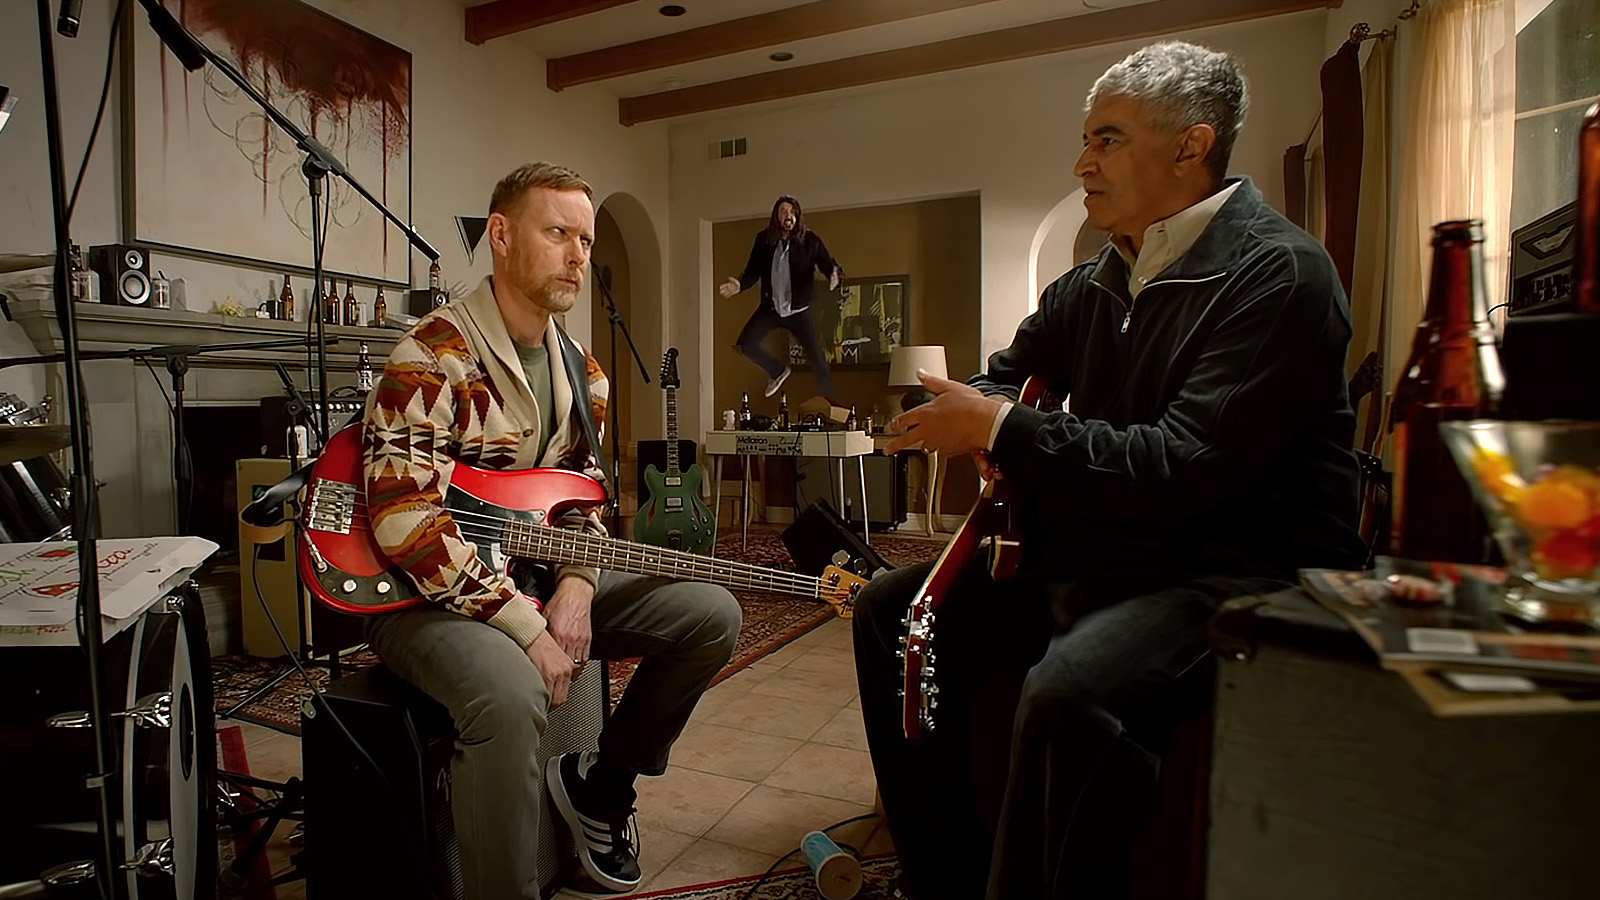 Something’s up with Dave. Nate Mendel and Pat Smear worry about their bandmate. Image © Sony Pictures